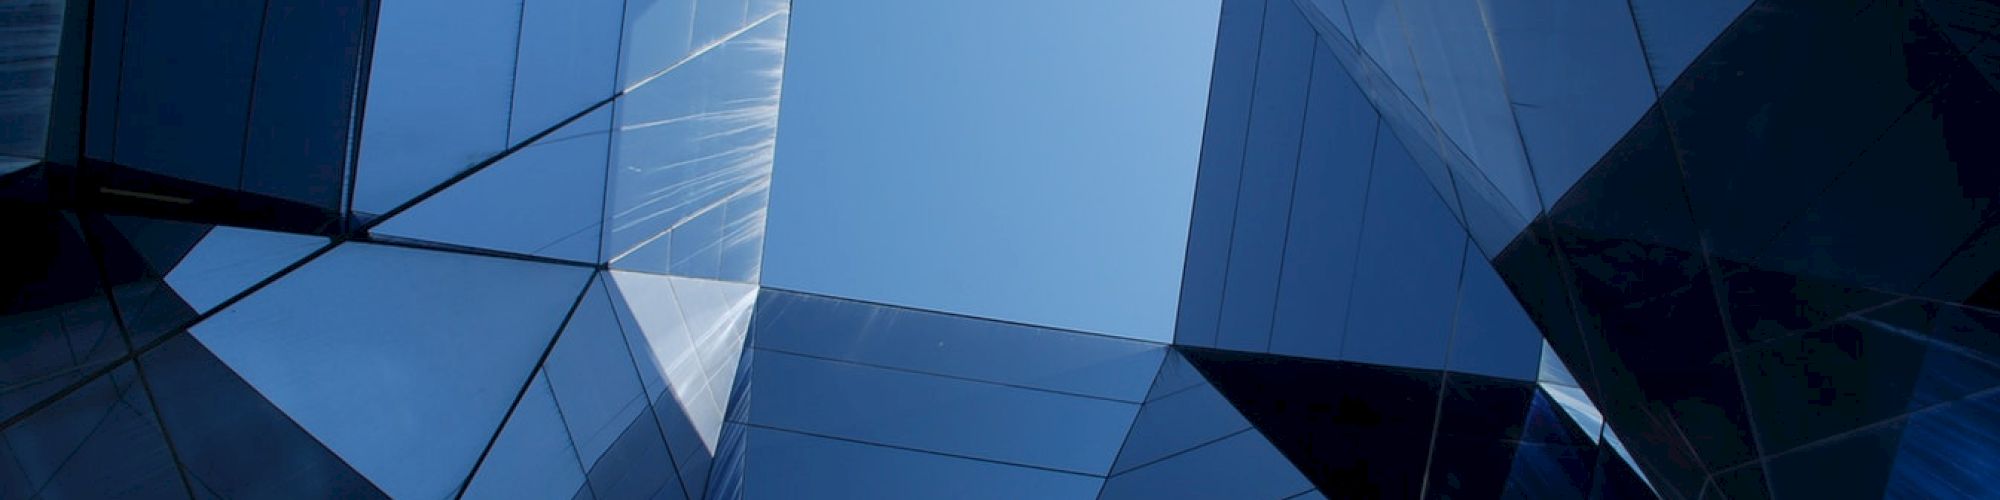 The image shows an upward view of a modern building with mirrored glass panels reflecting the sky, creating a symmetrical geometric pattern.